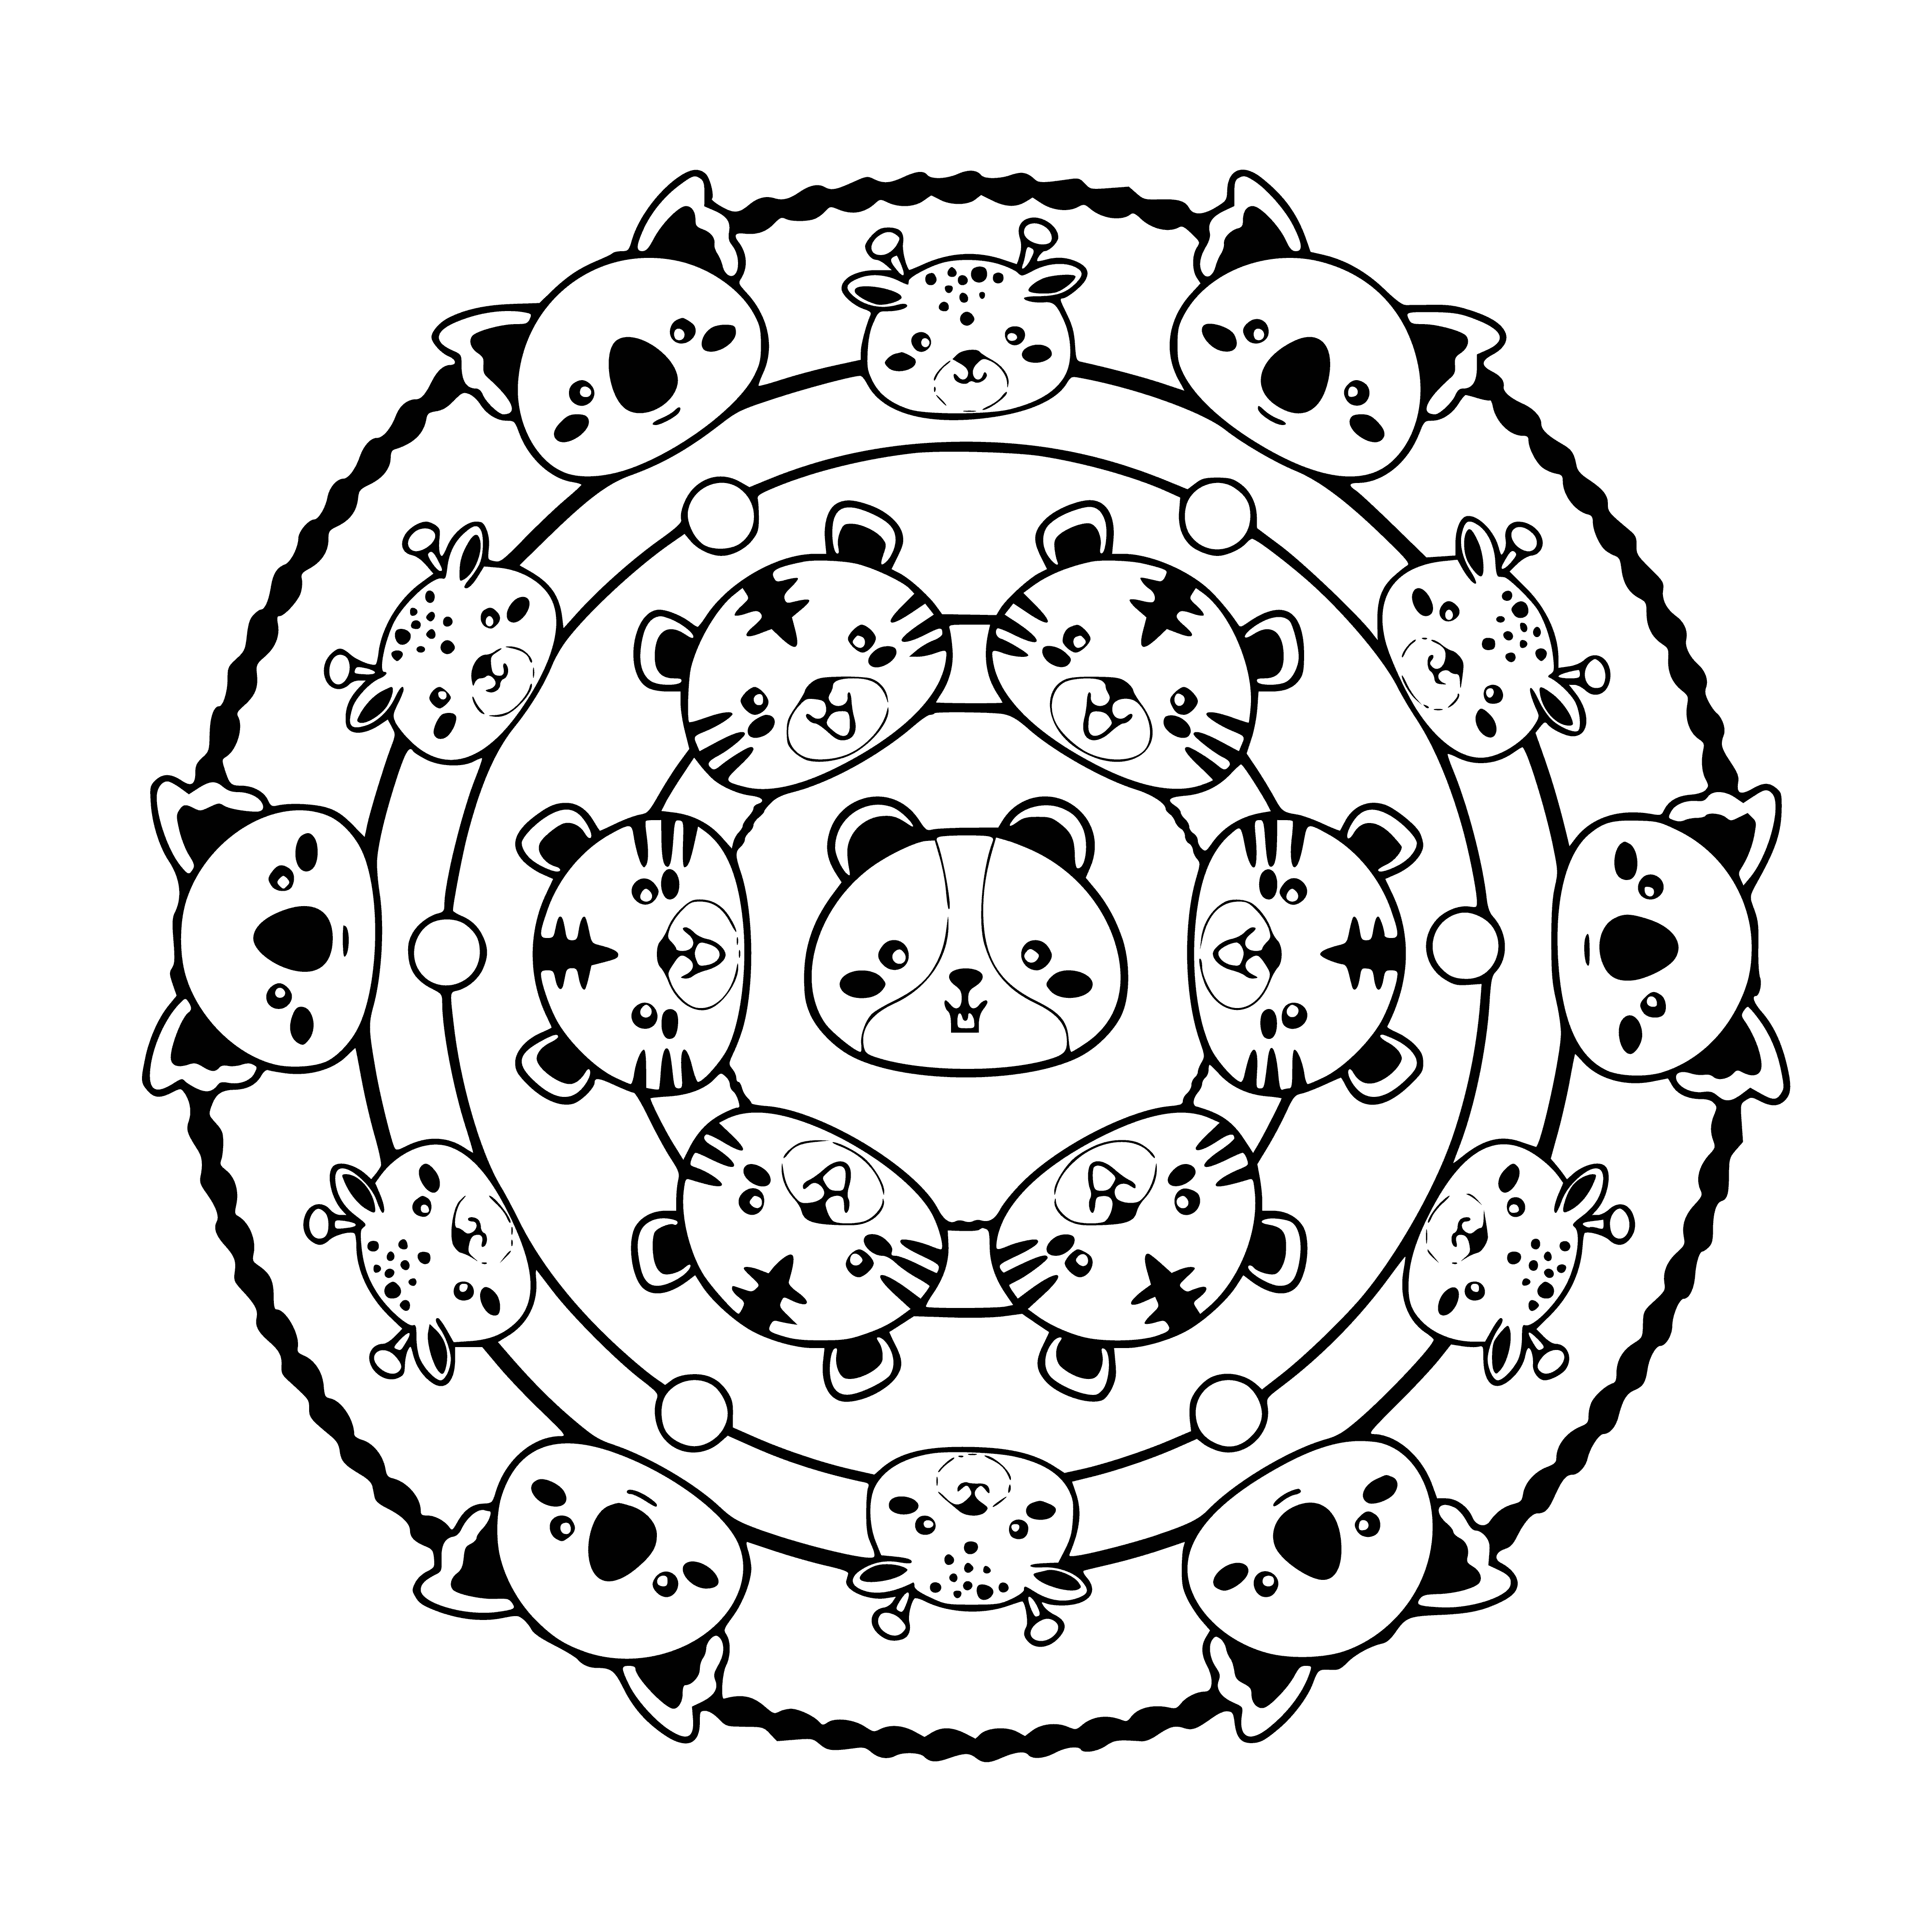 coloring page: Mandala features lion, tiger, elephant + bird, snake, frog in yellows, greens, and blues.